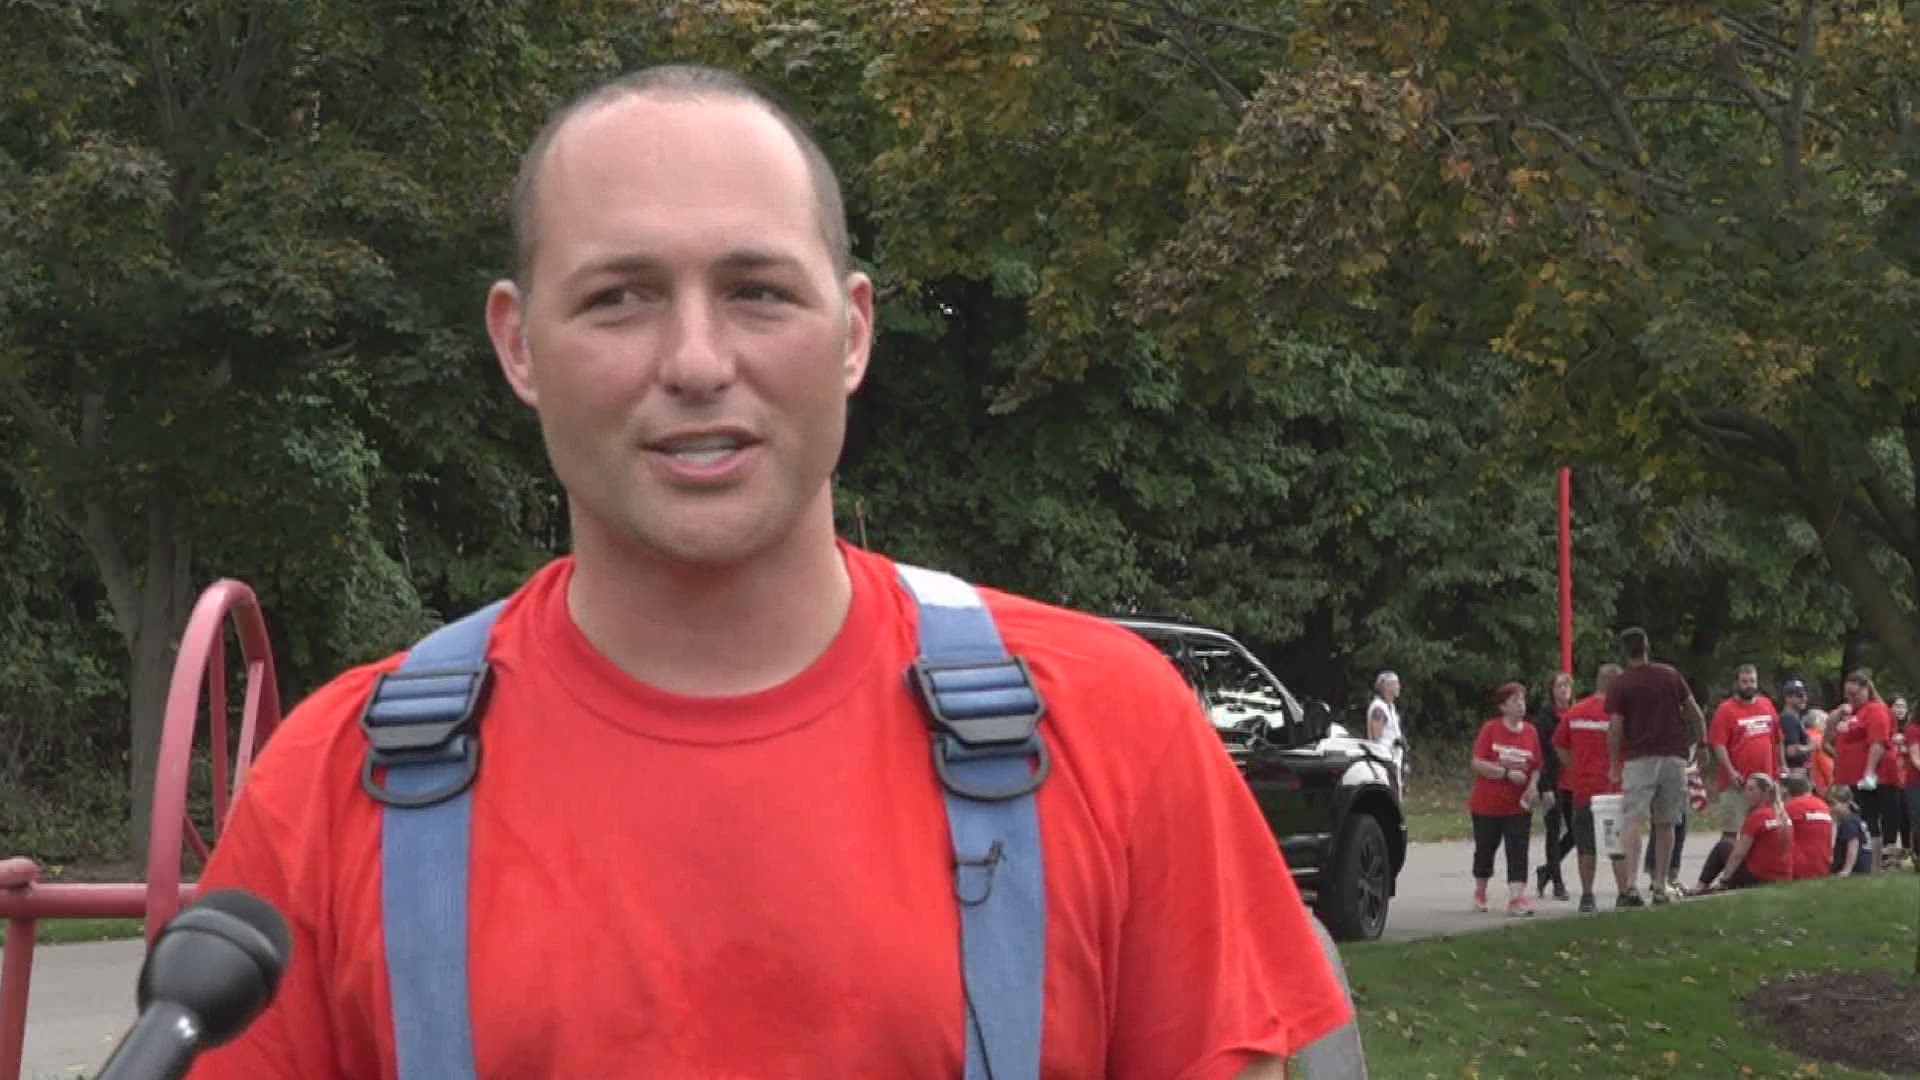 It took three days for the Macomb County firefighter to cross the state, raising thousands of dollars for firefighters' families.